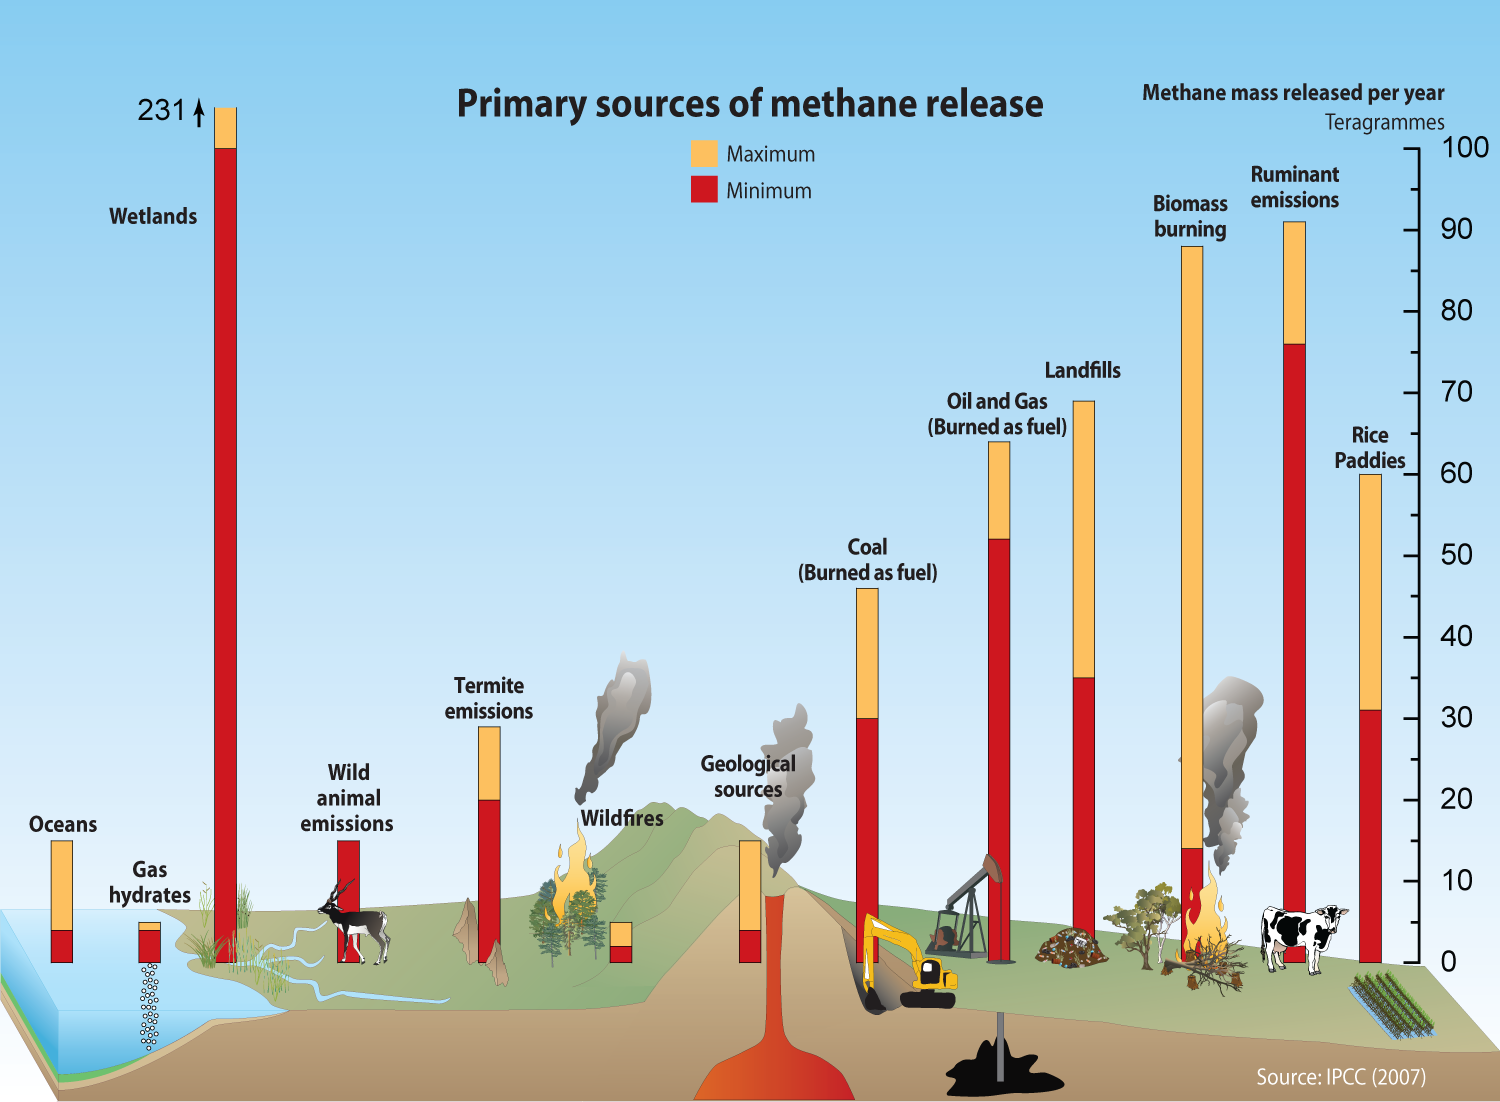 Reducing methane emissions requires understanding which sectors to target.